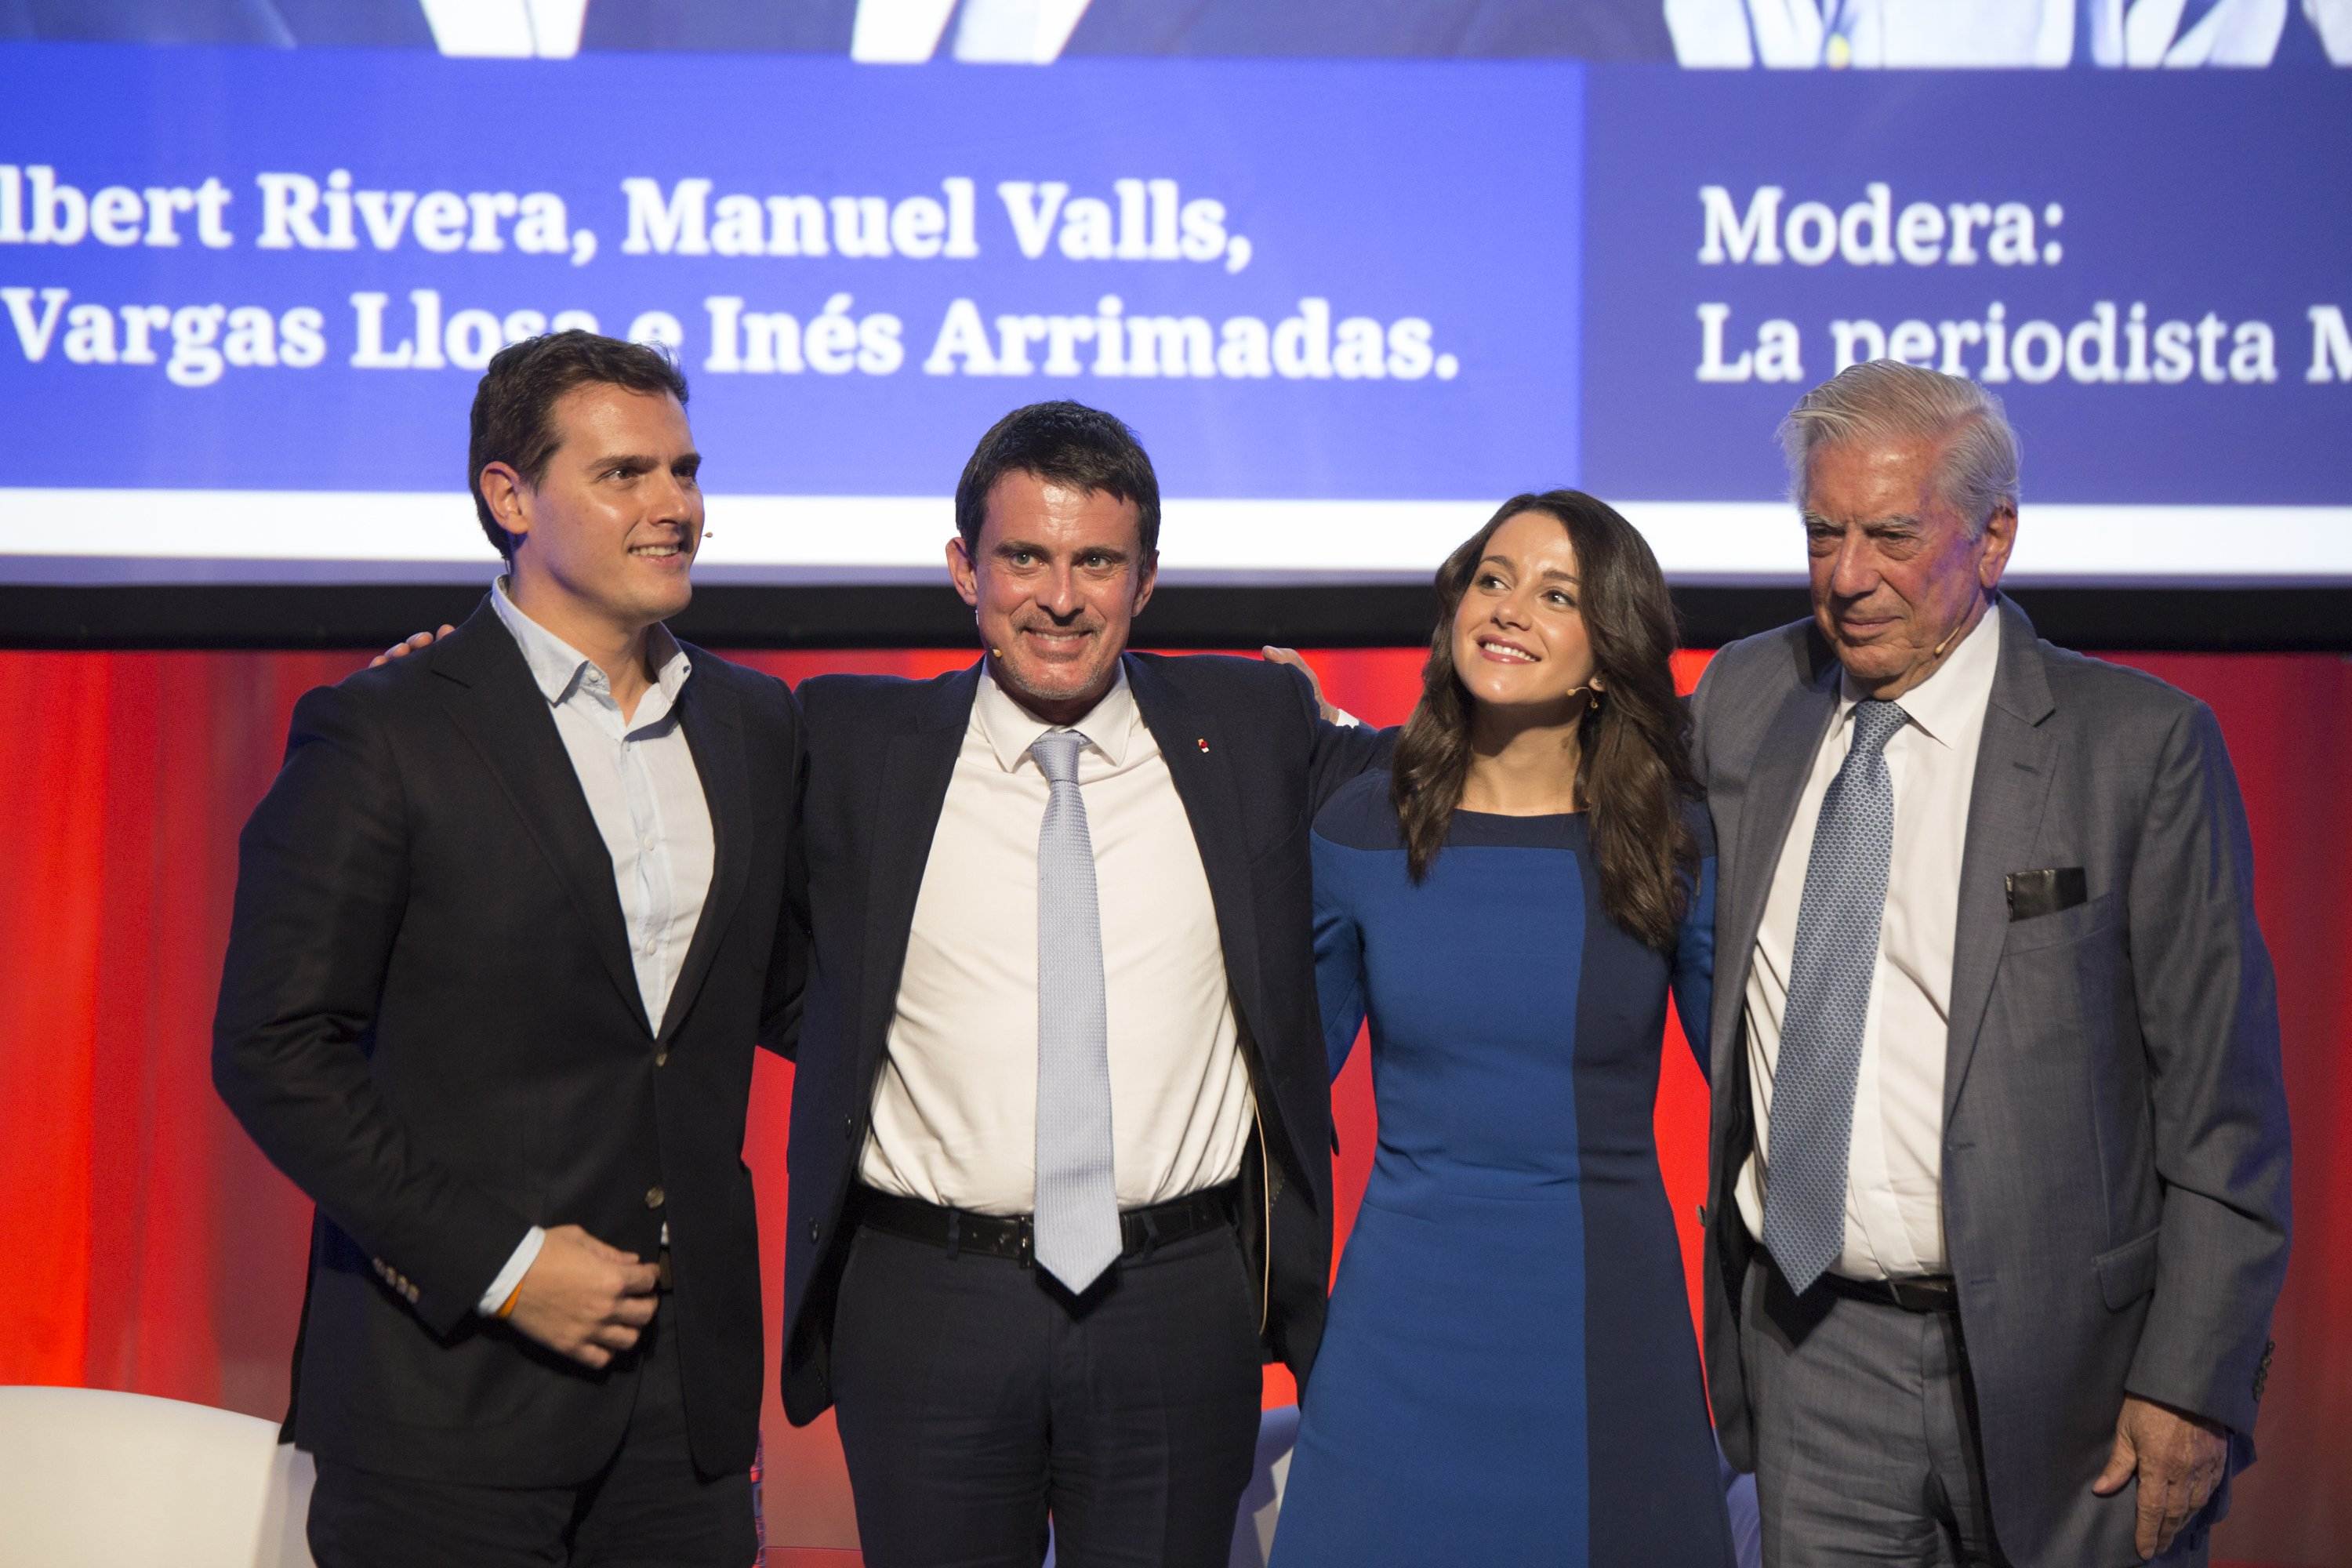 Ciudadanos can't get their story straight on Manuel Valls and Ada Colau